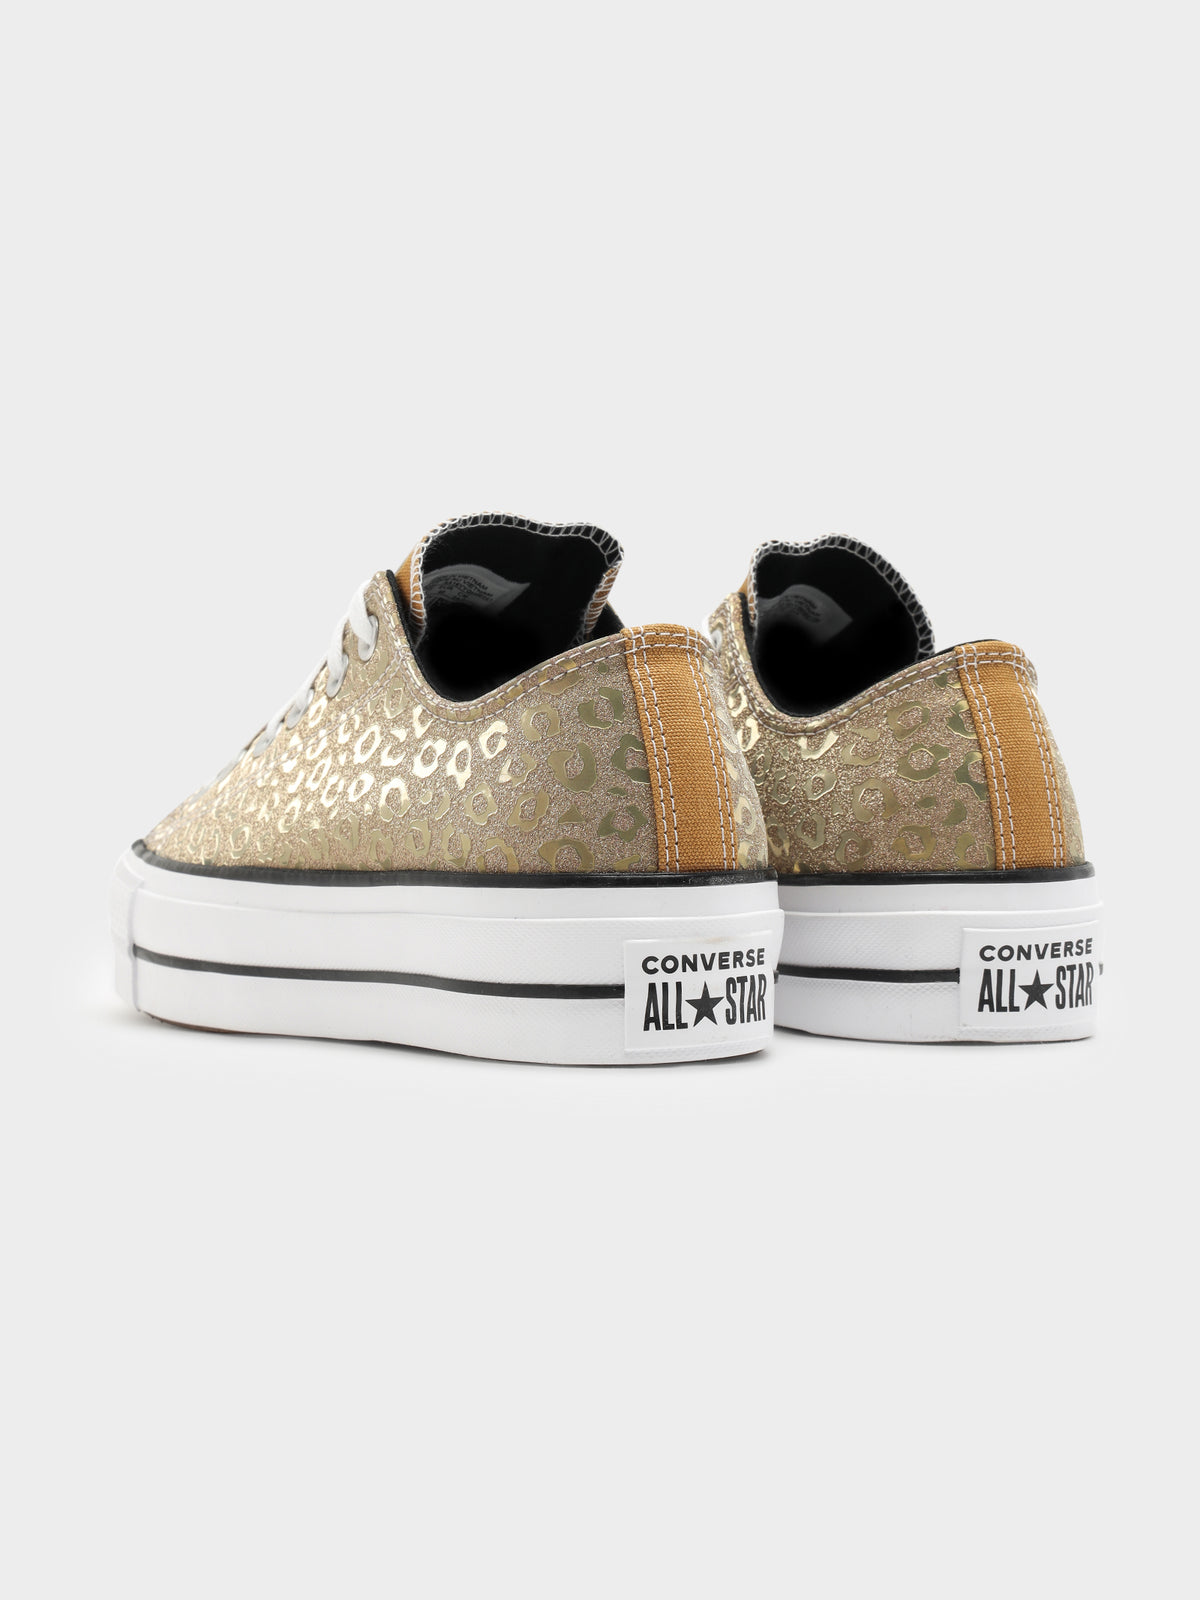 Womens Chuck Taylor All Star Lift Authentic Glam Low Top Sneakers in Gold Leopard